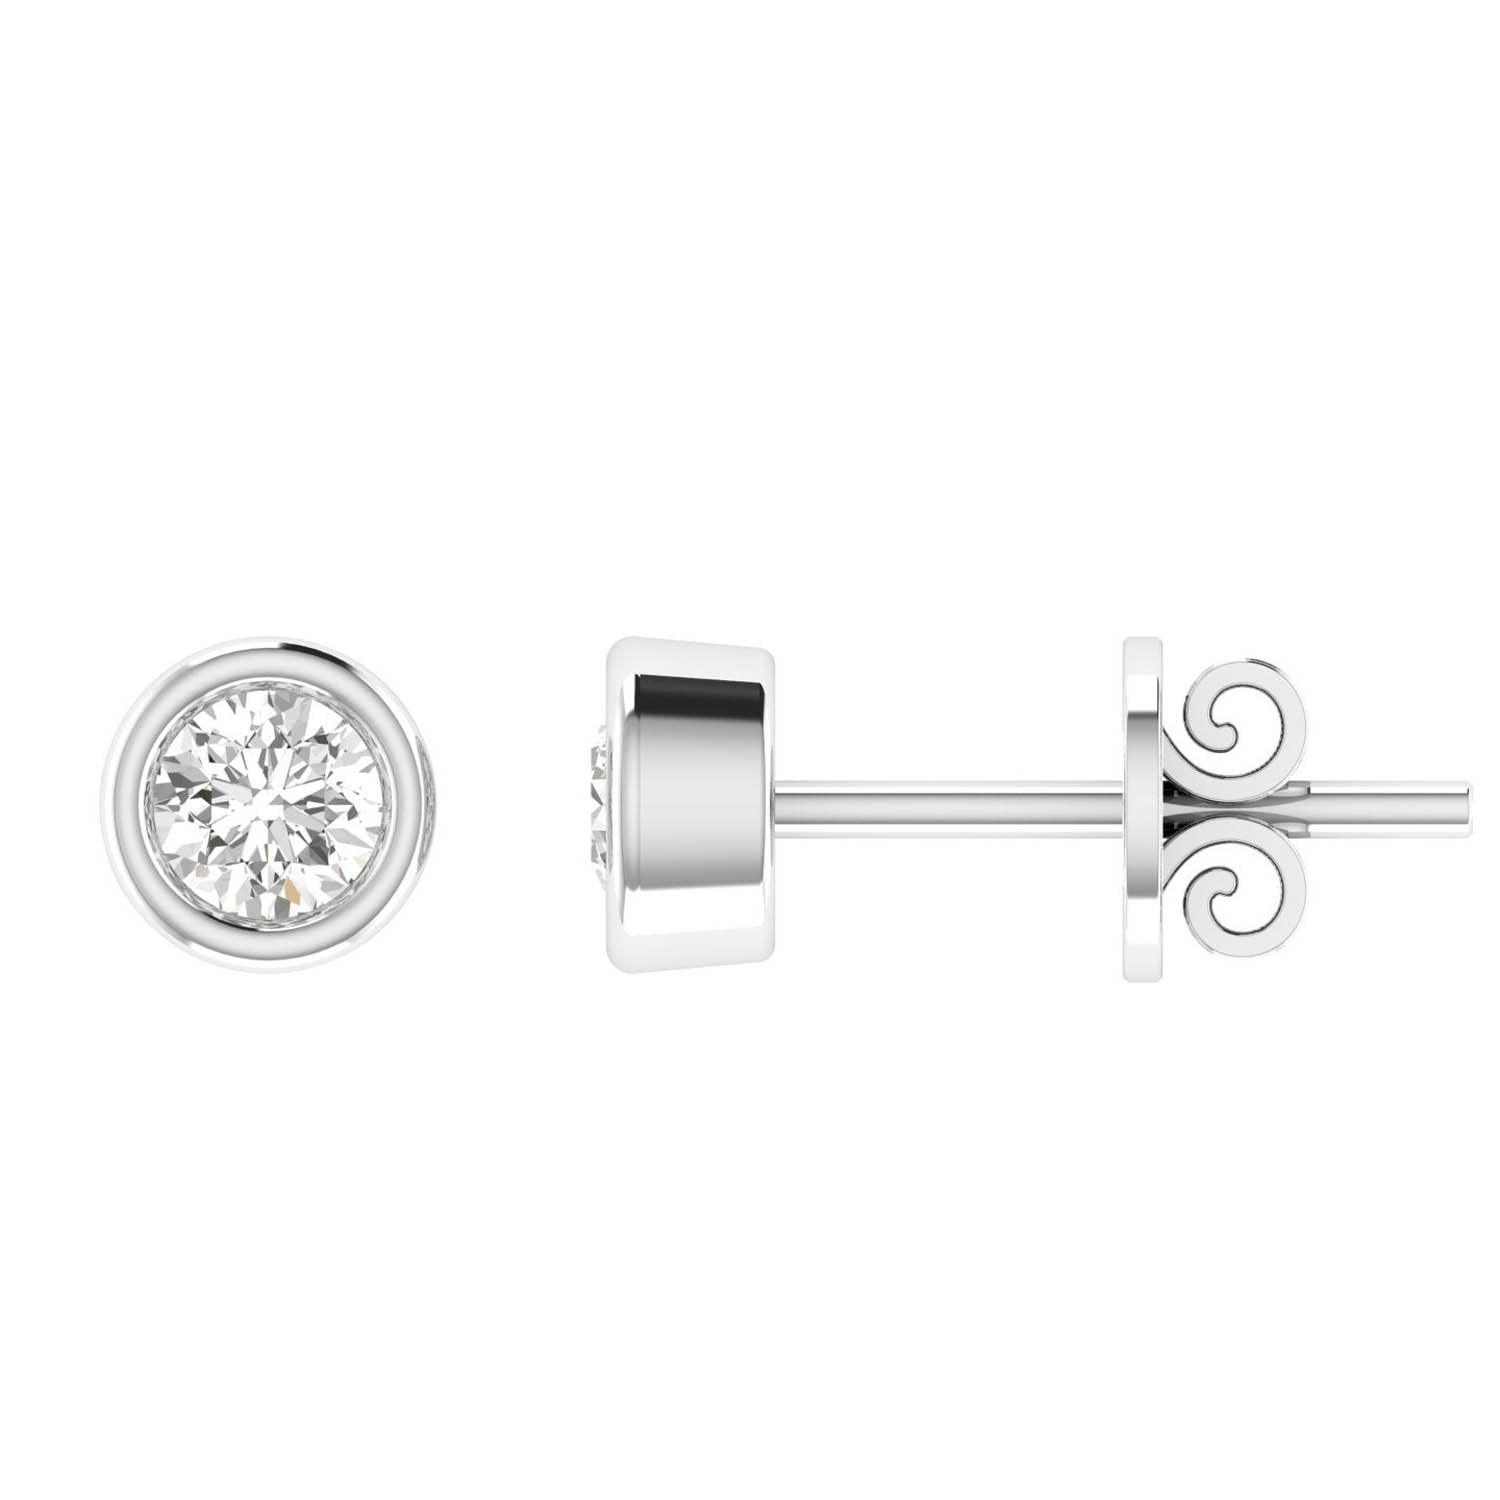 Diamond Stud Earrings with 0.46ct Diamonds in 18K White Gold - 18WBE46